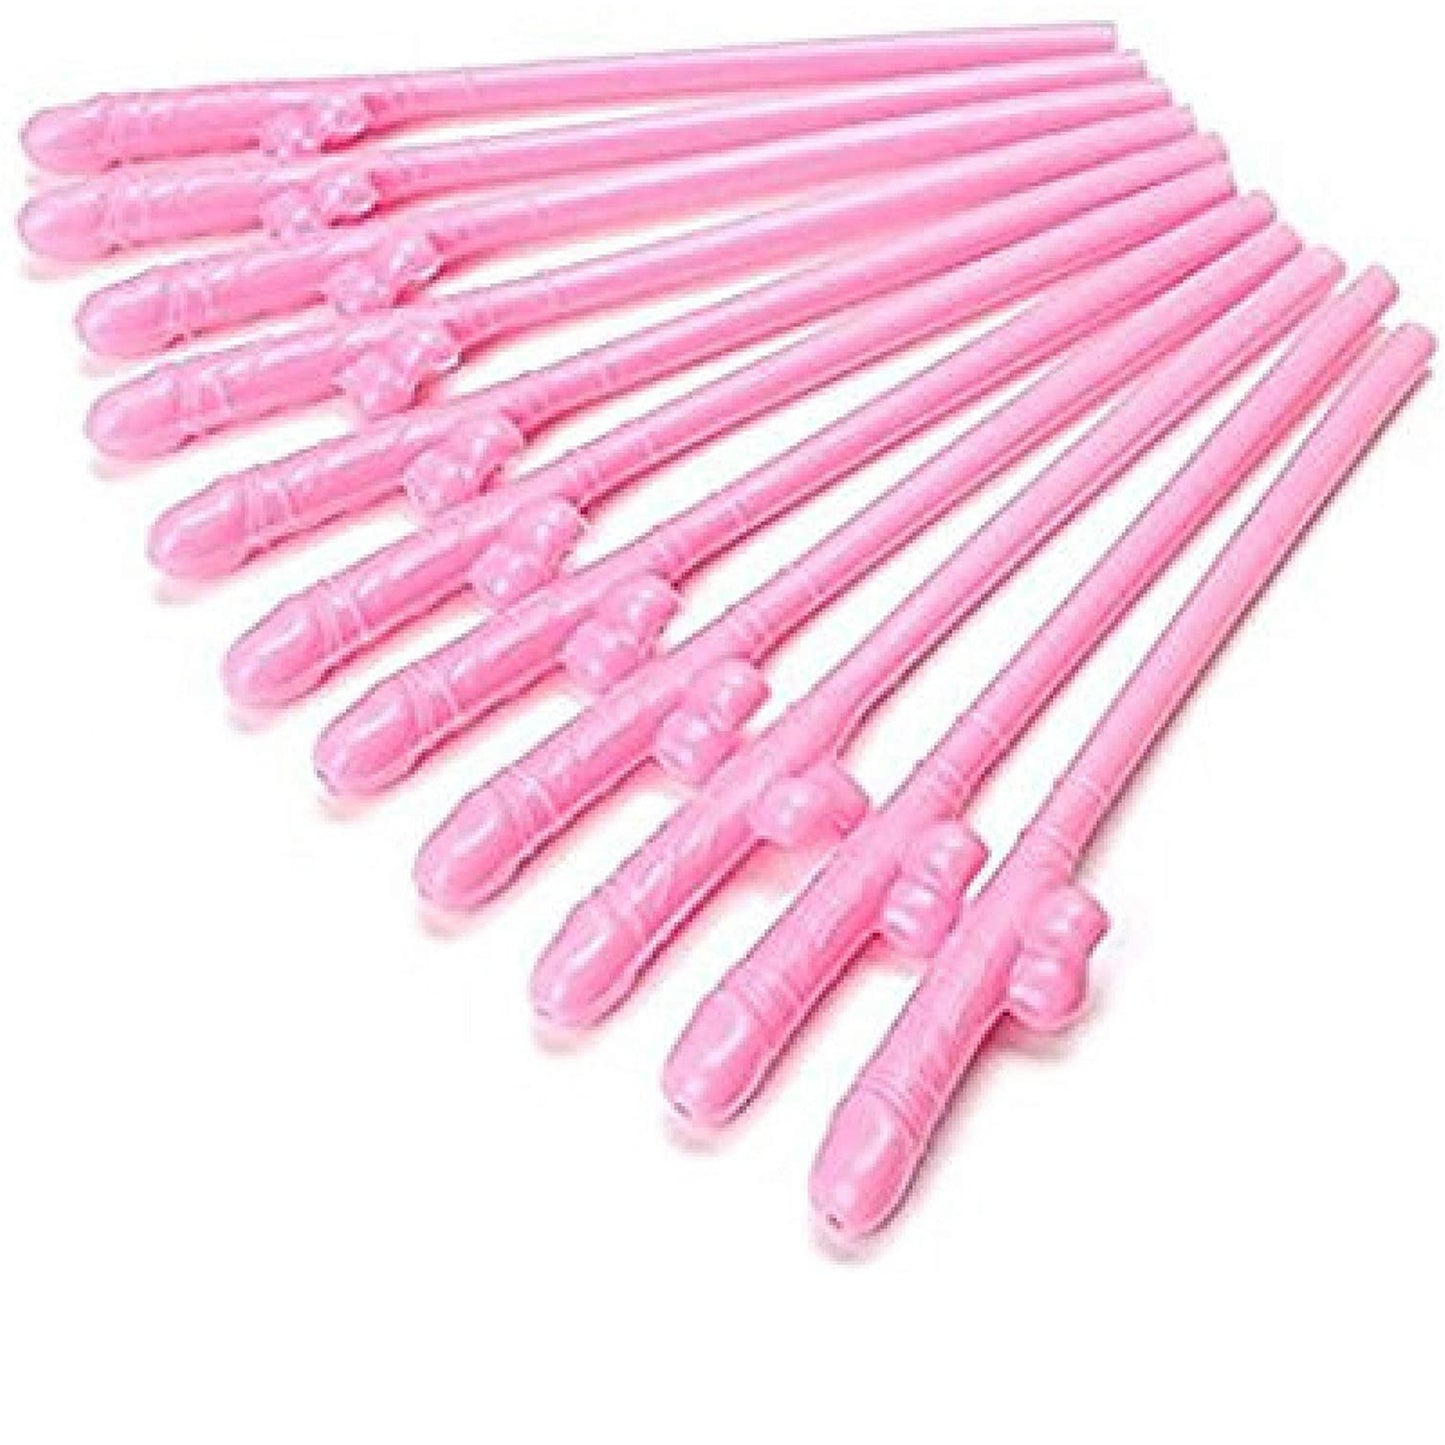 Penis Straw, Bachelorette Party, Hens Party, Penis Decorations